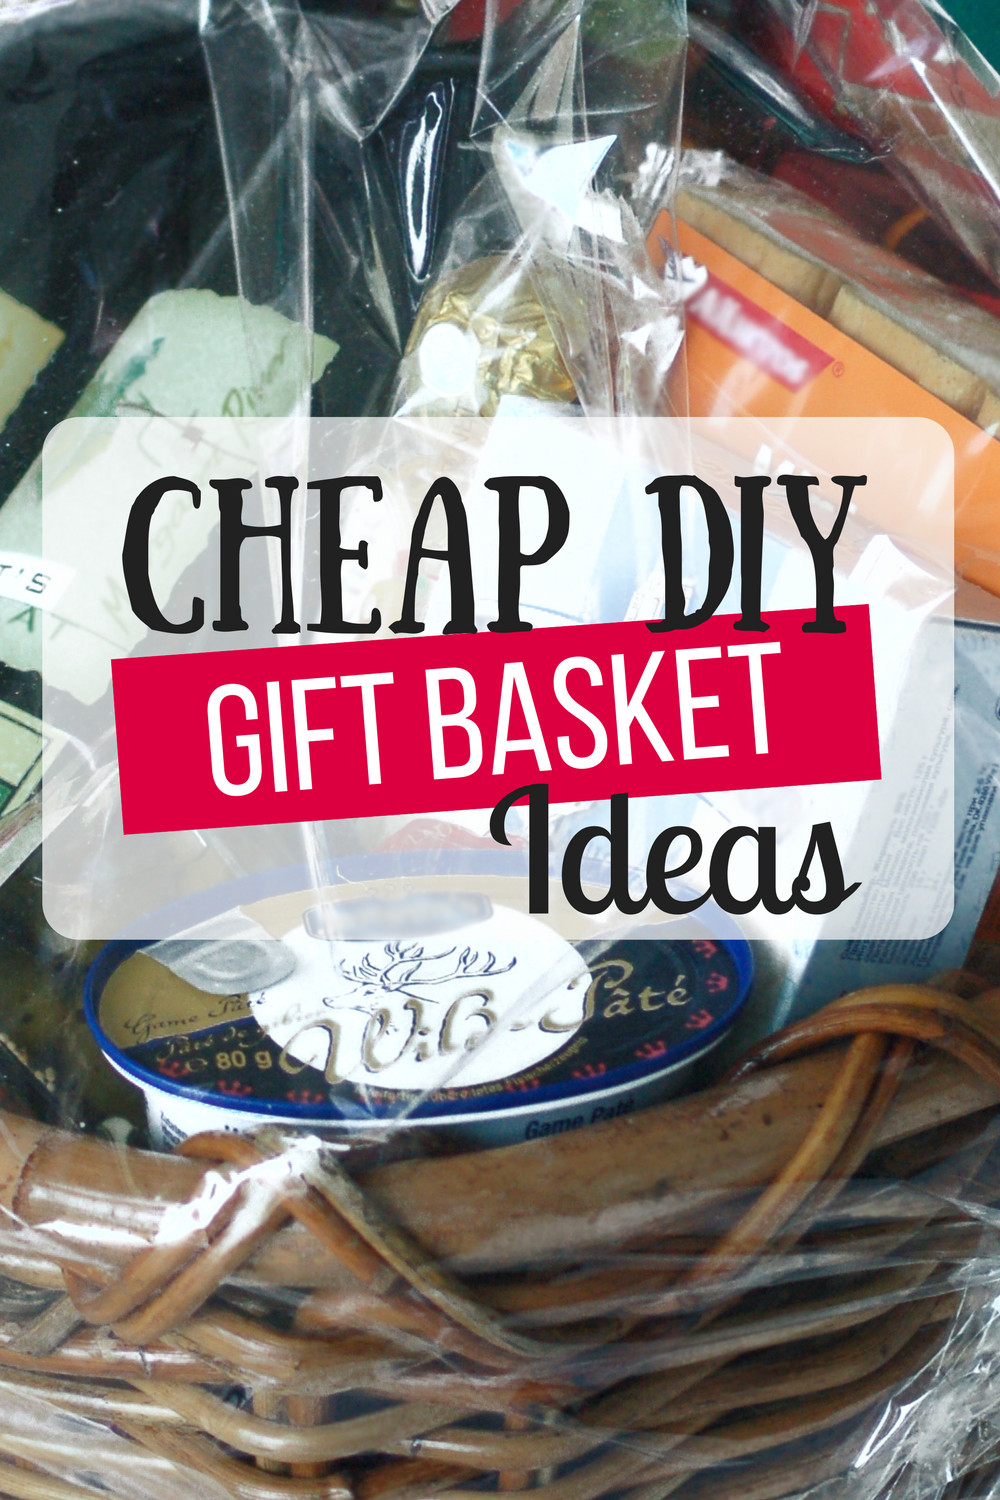 Nice Gift Basket Ideas
 Cheap DIY Gift Baskets The Busy Bud er